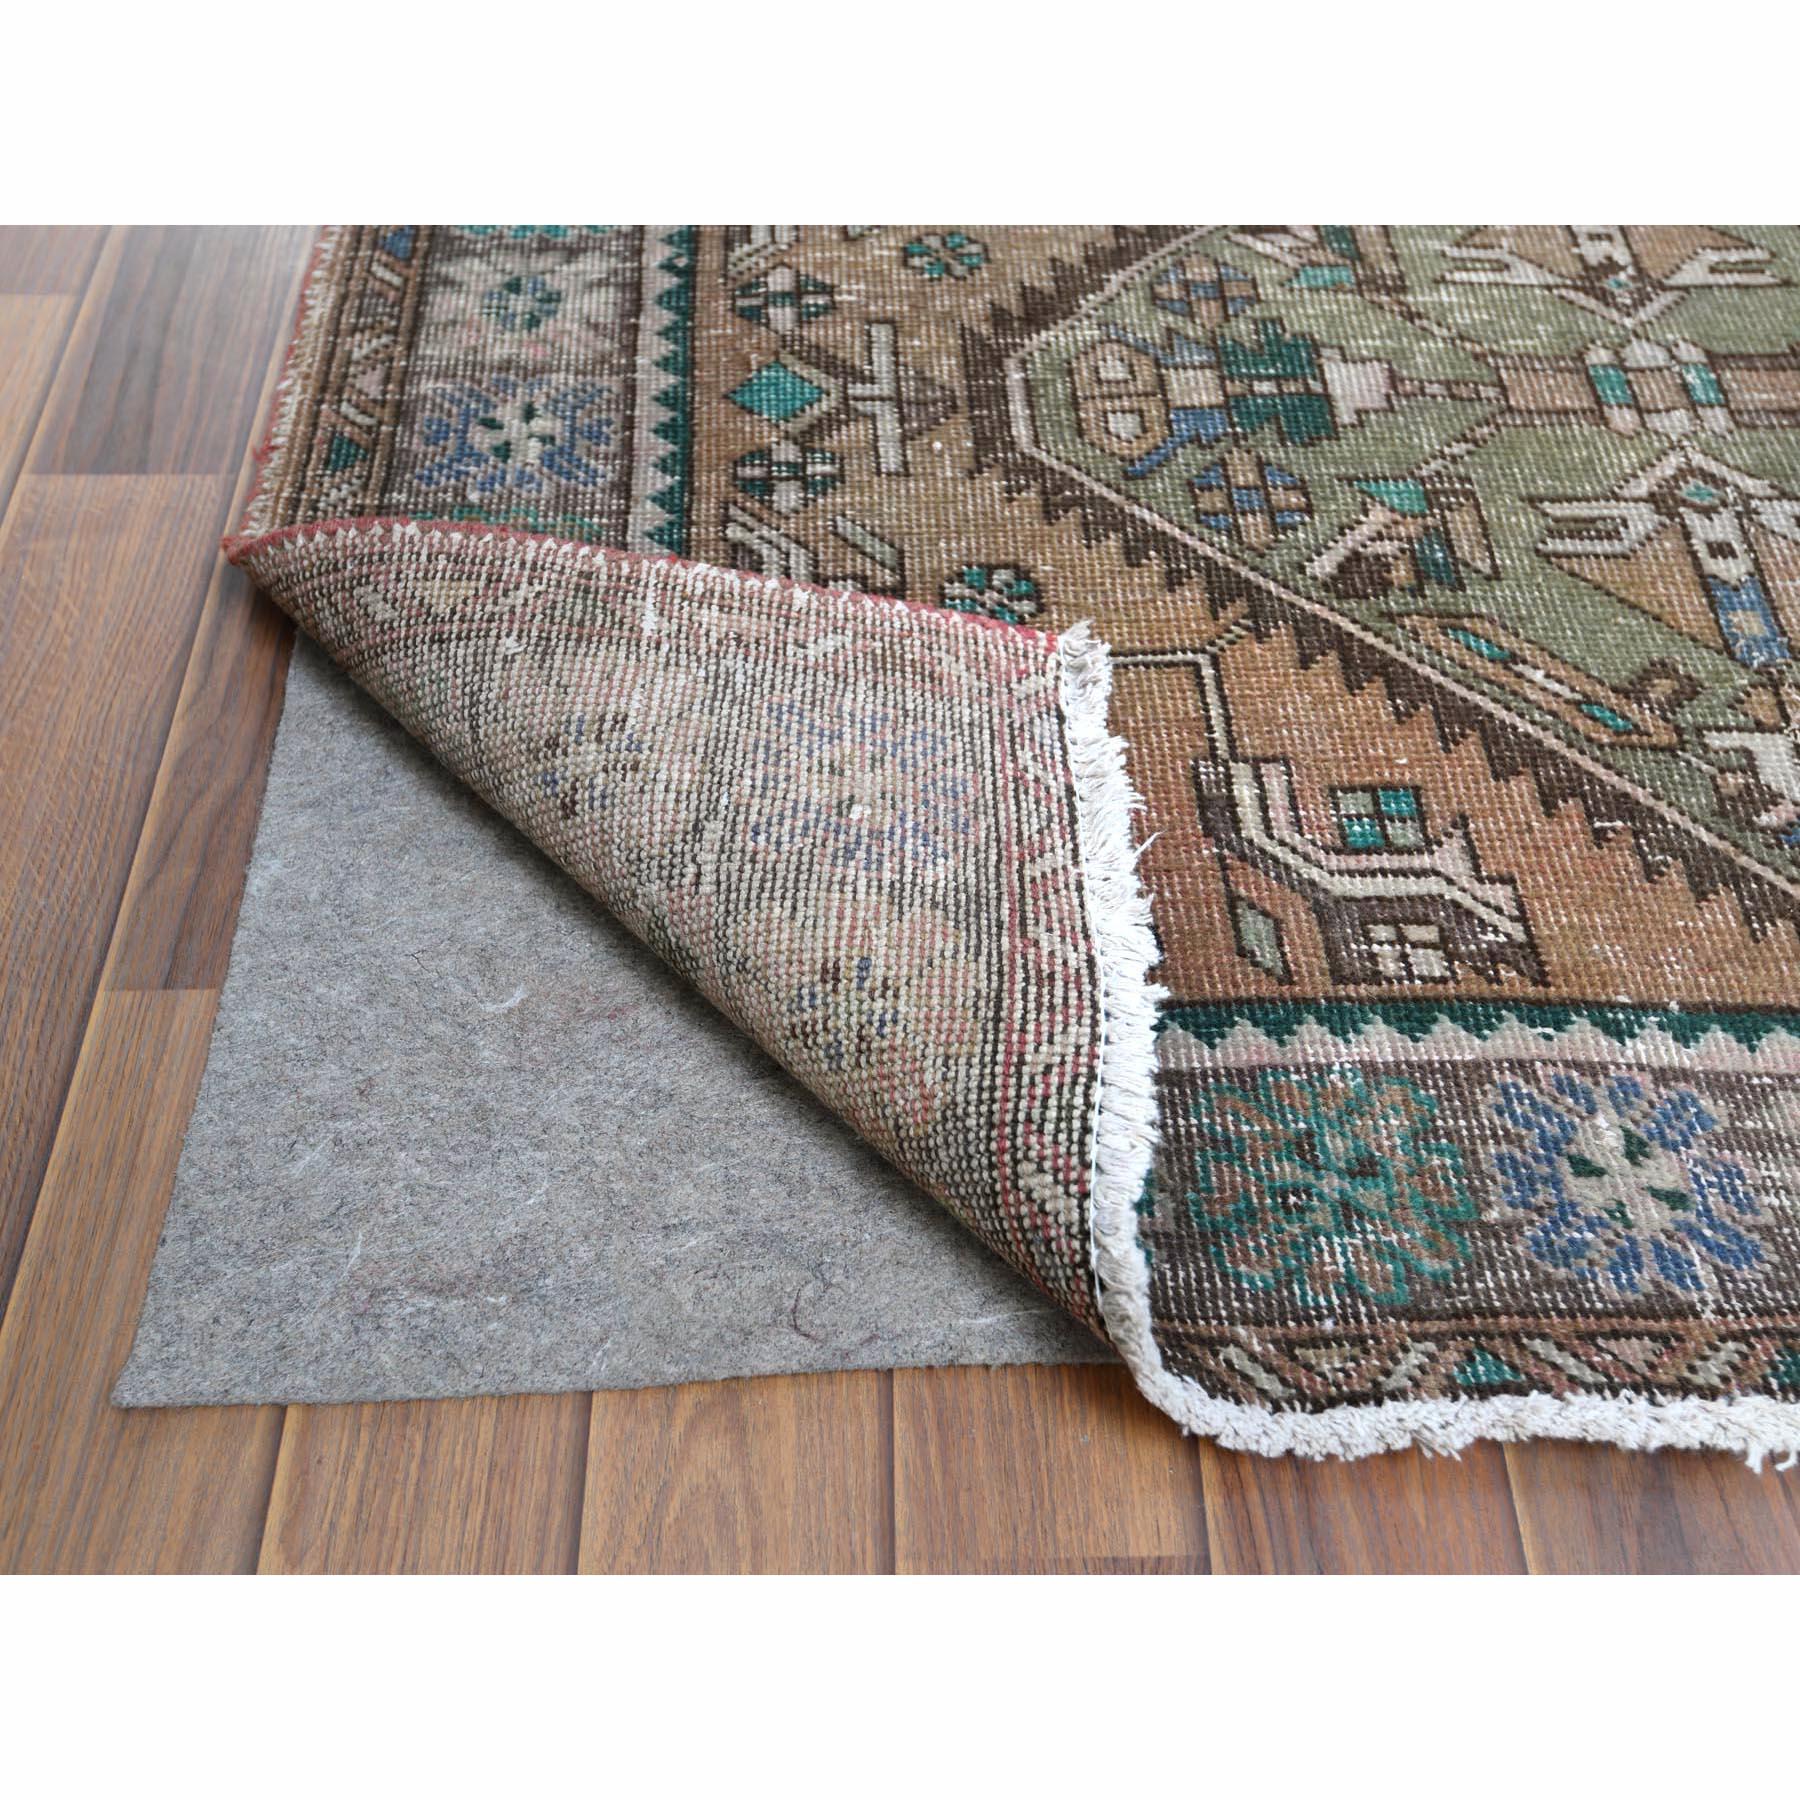 Medieval Old Hand Knotted Tan Color Northwest Persian Serrated Medallion Worn Wool Rug For Sale